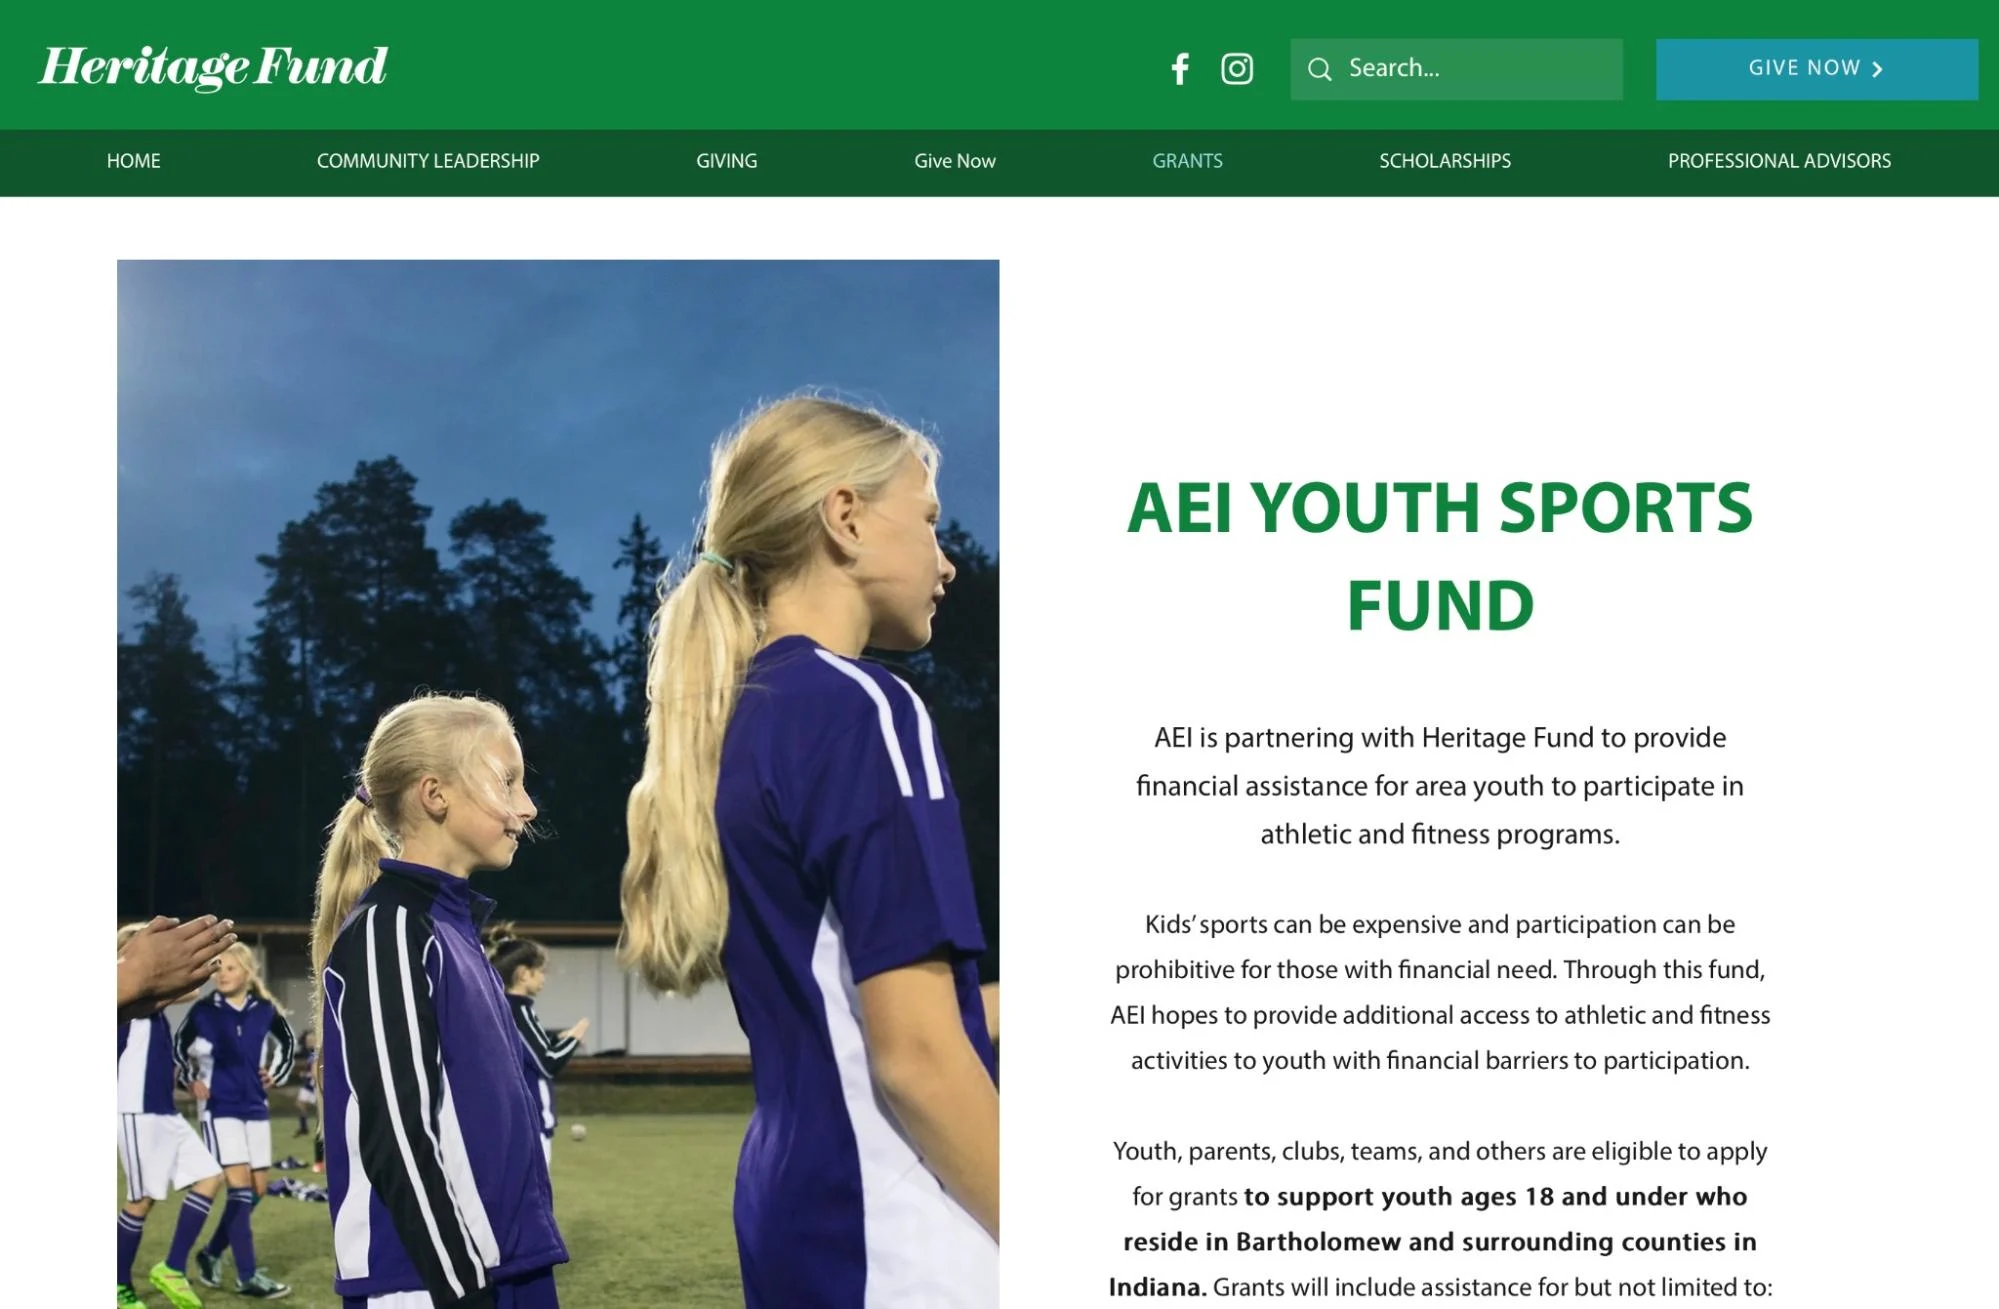 aei heritage fund grant for youth sports